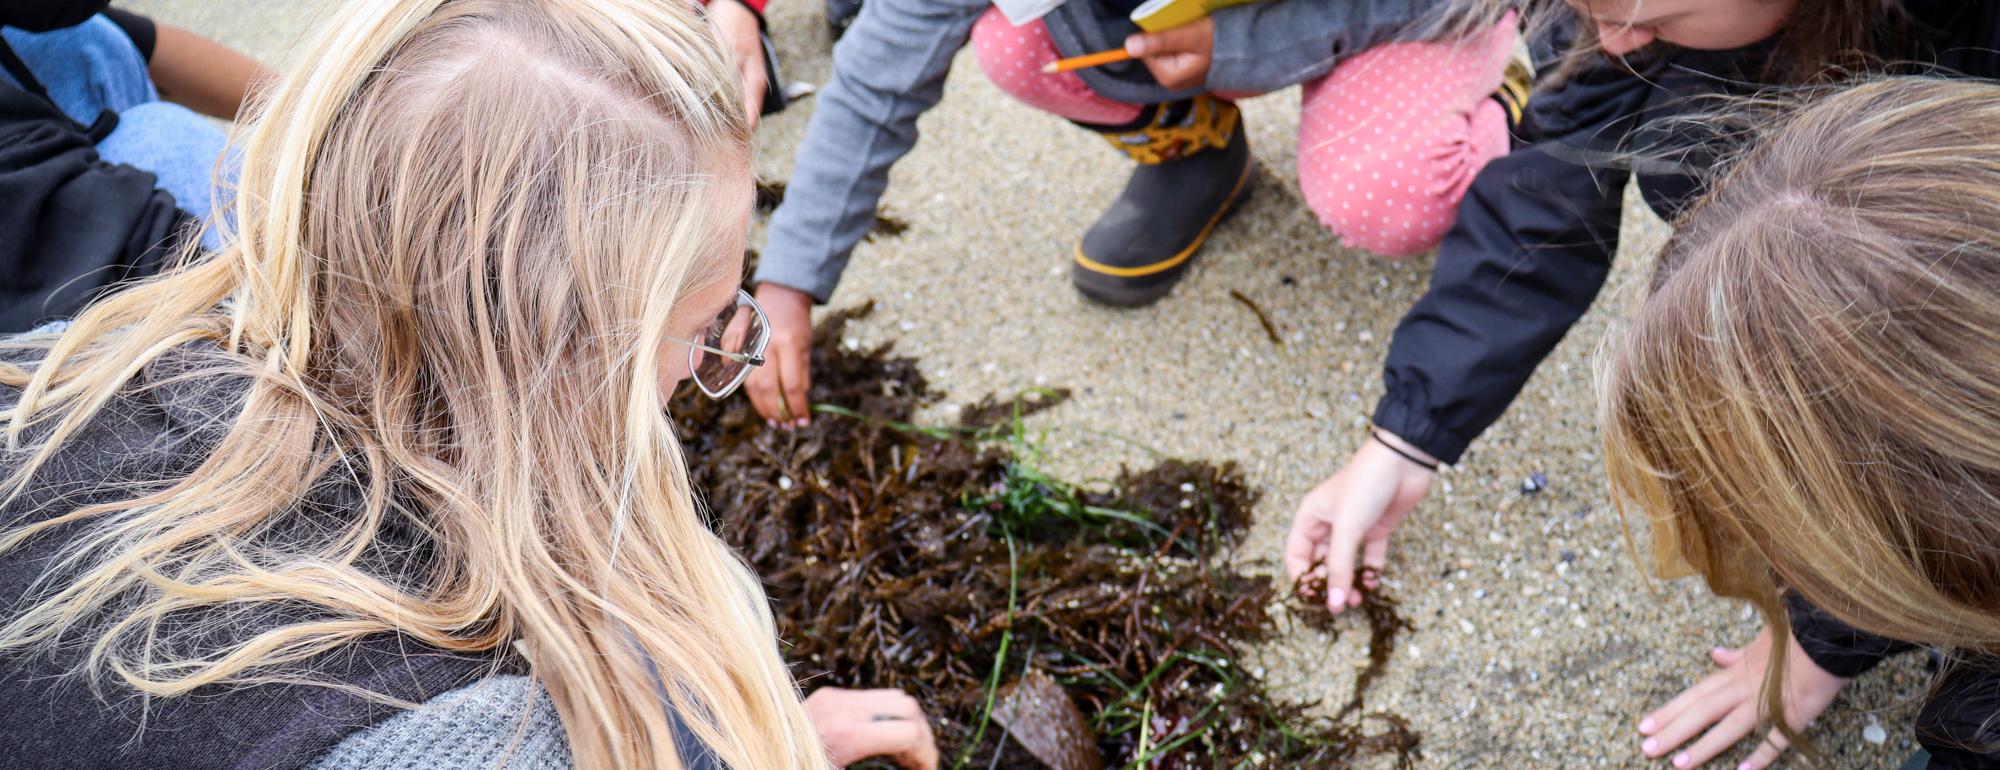 A group of students gathered around a piece of kelp that is washed up on the beach.